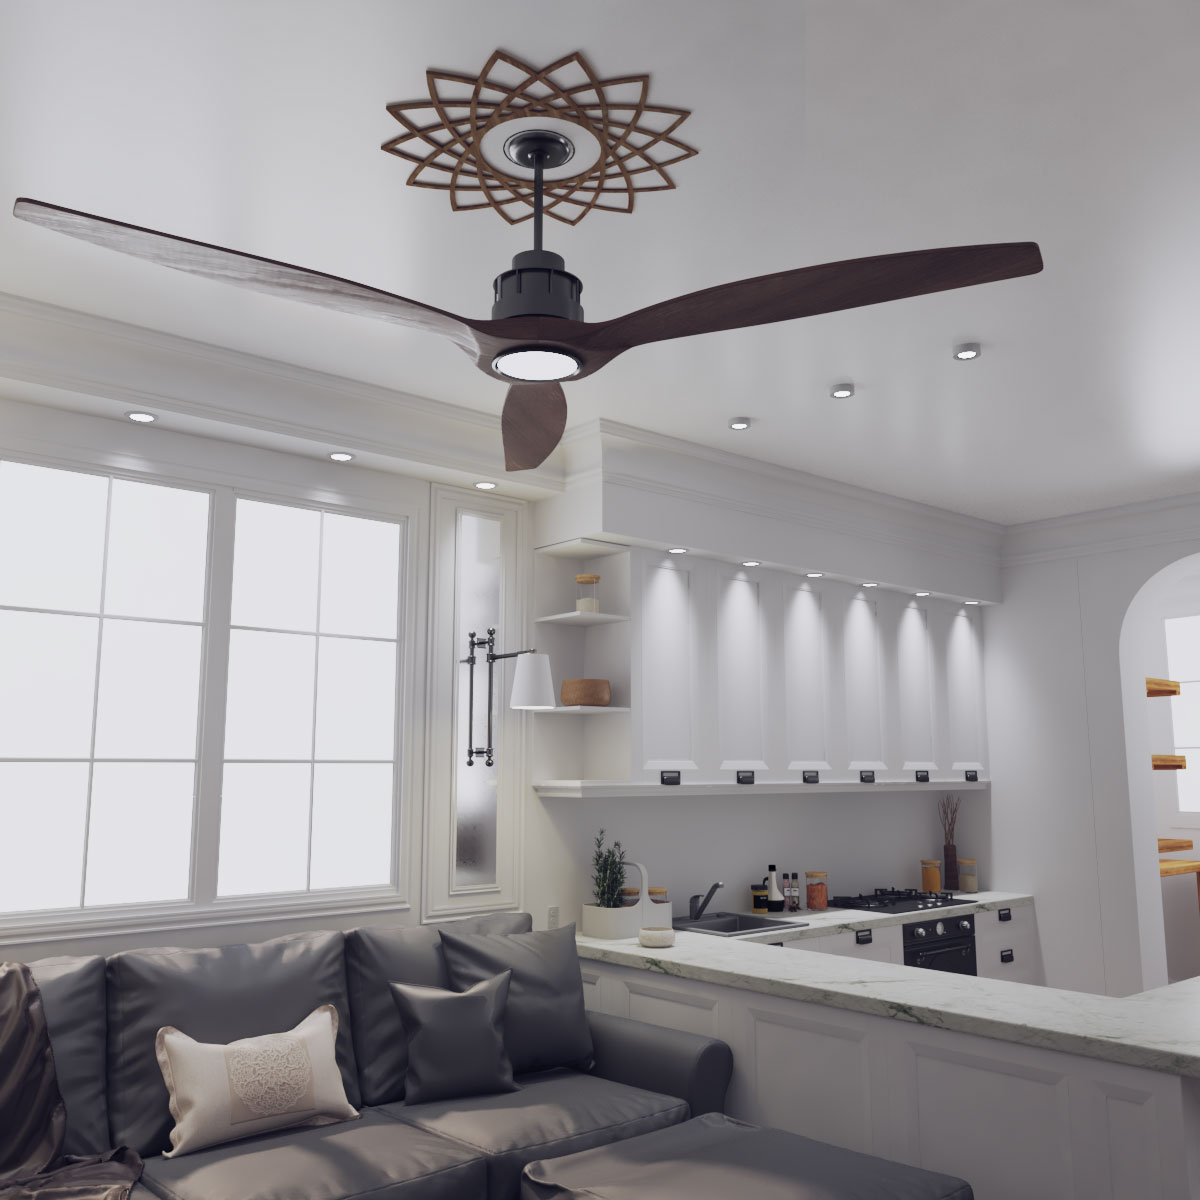 Main Causes For Noisy Ceiling Fans: Tips For Effective Solutions